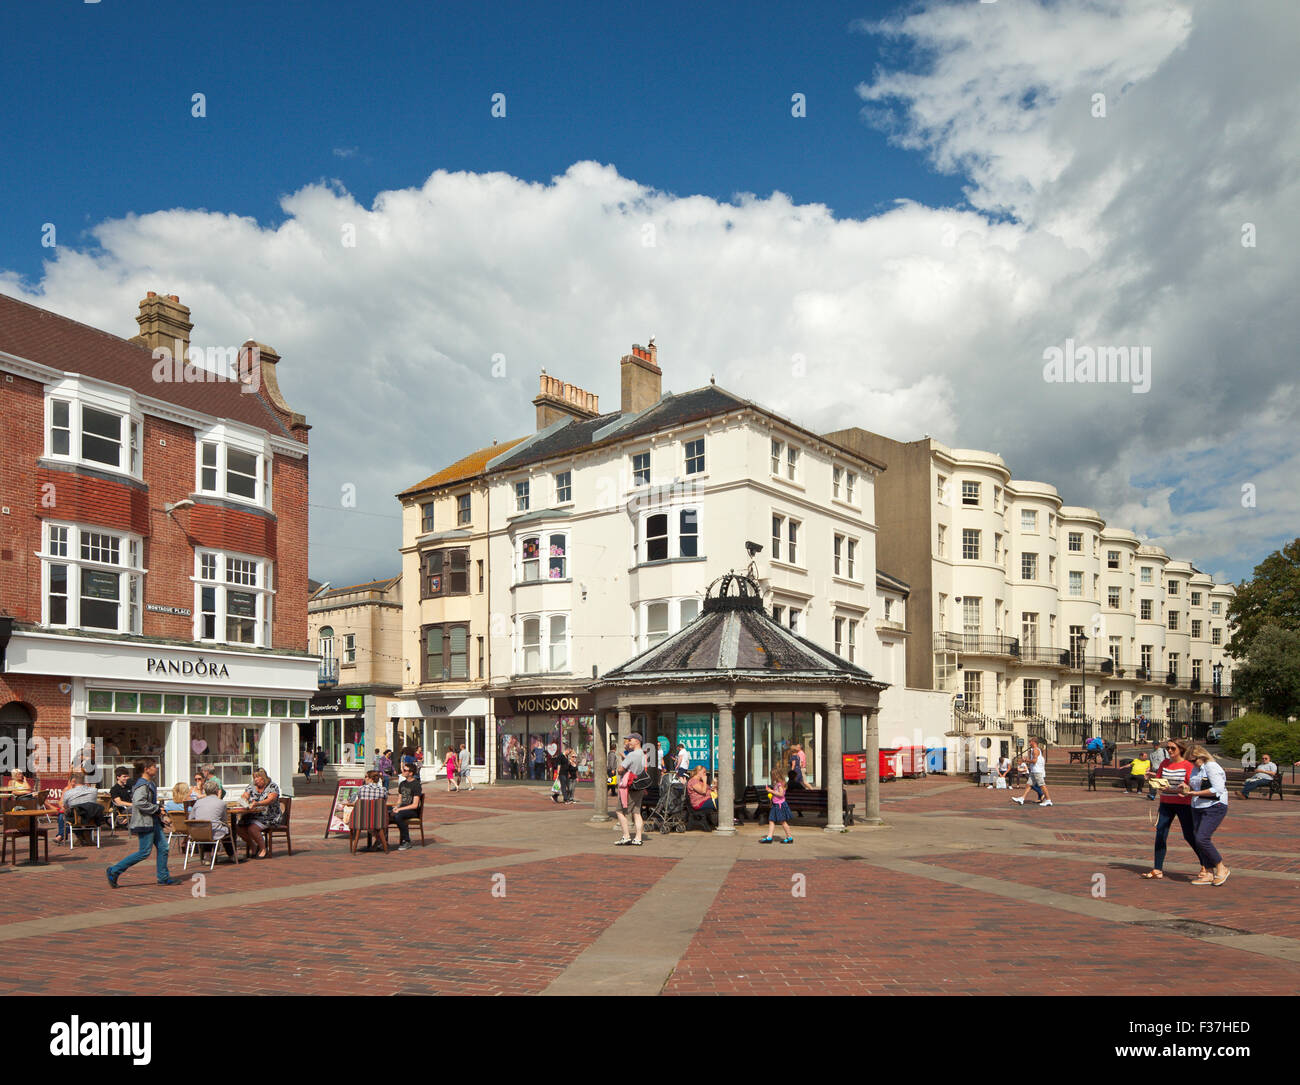 Montague Place Worthing. Foto Stock